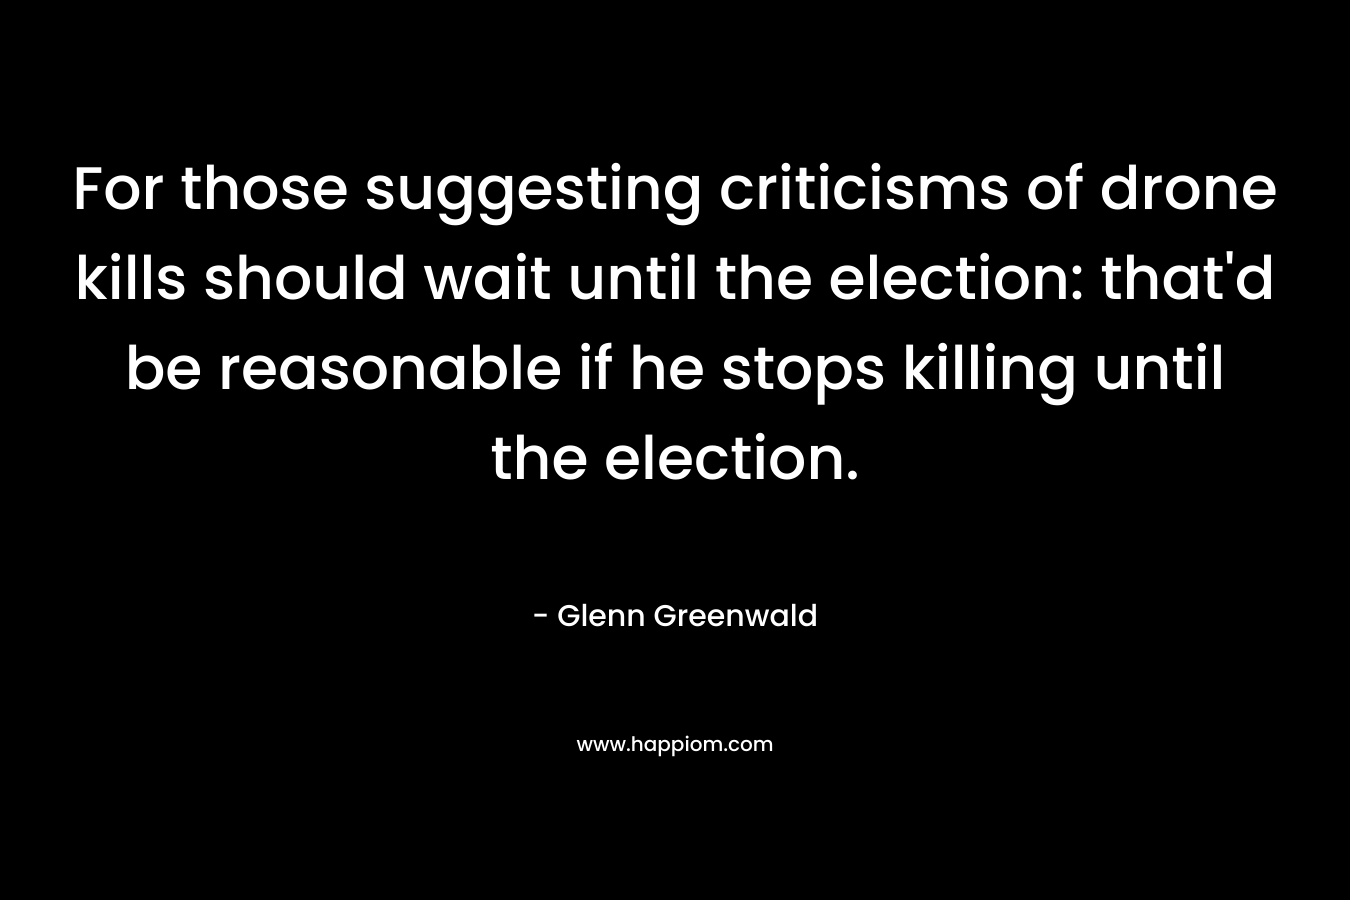 For those suggesting criticisms of drone kills should wait until the election: that’d be reasonable if he stops killing until the election. – Glenn Greenwald